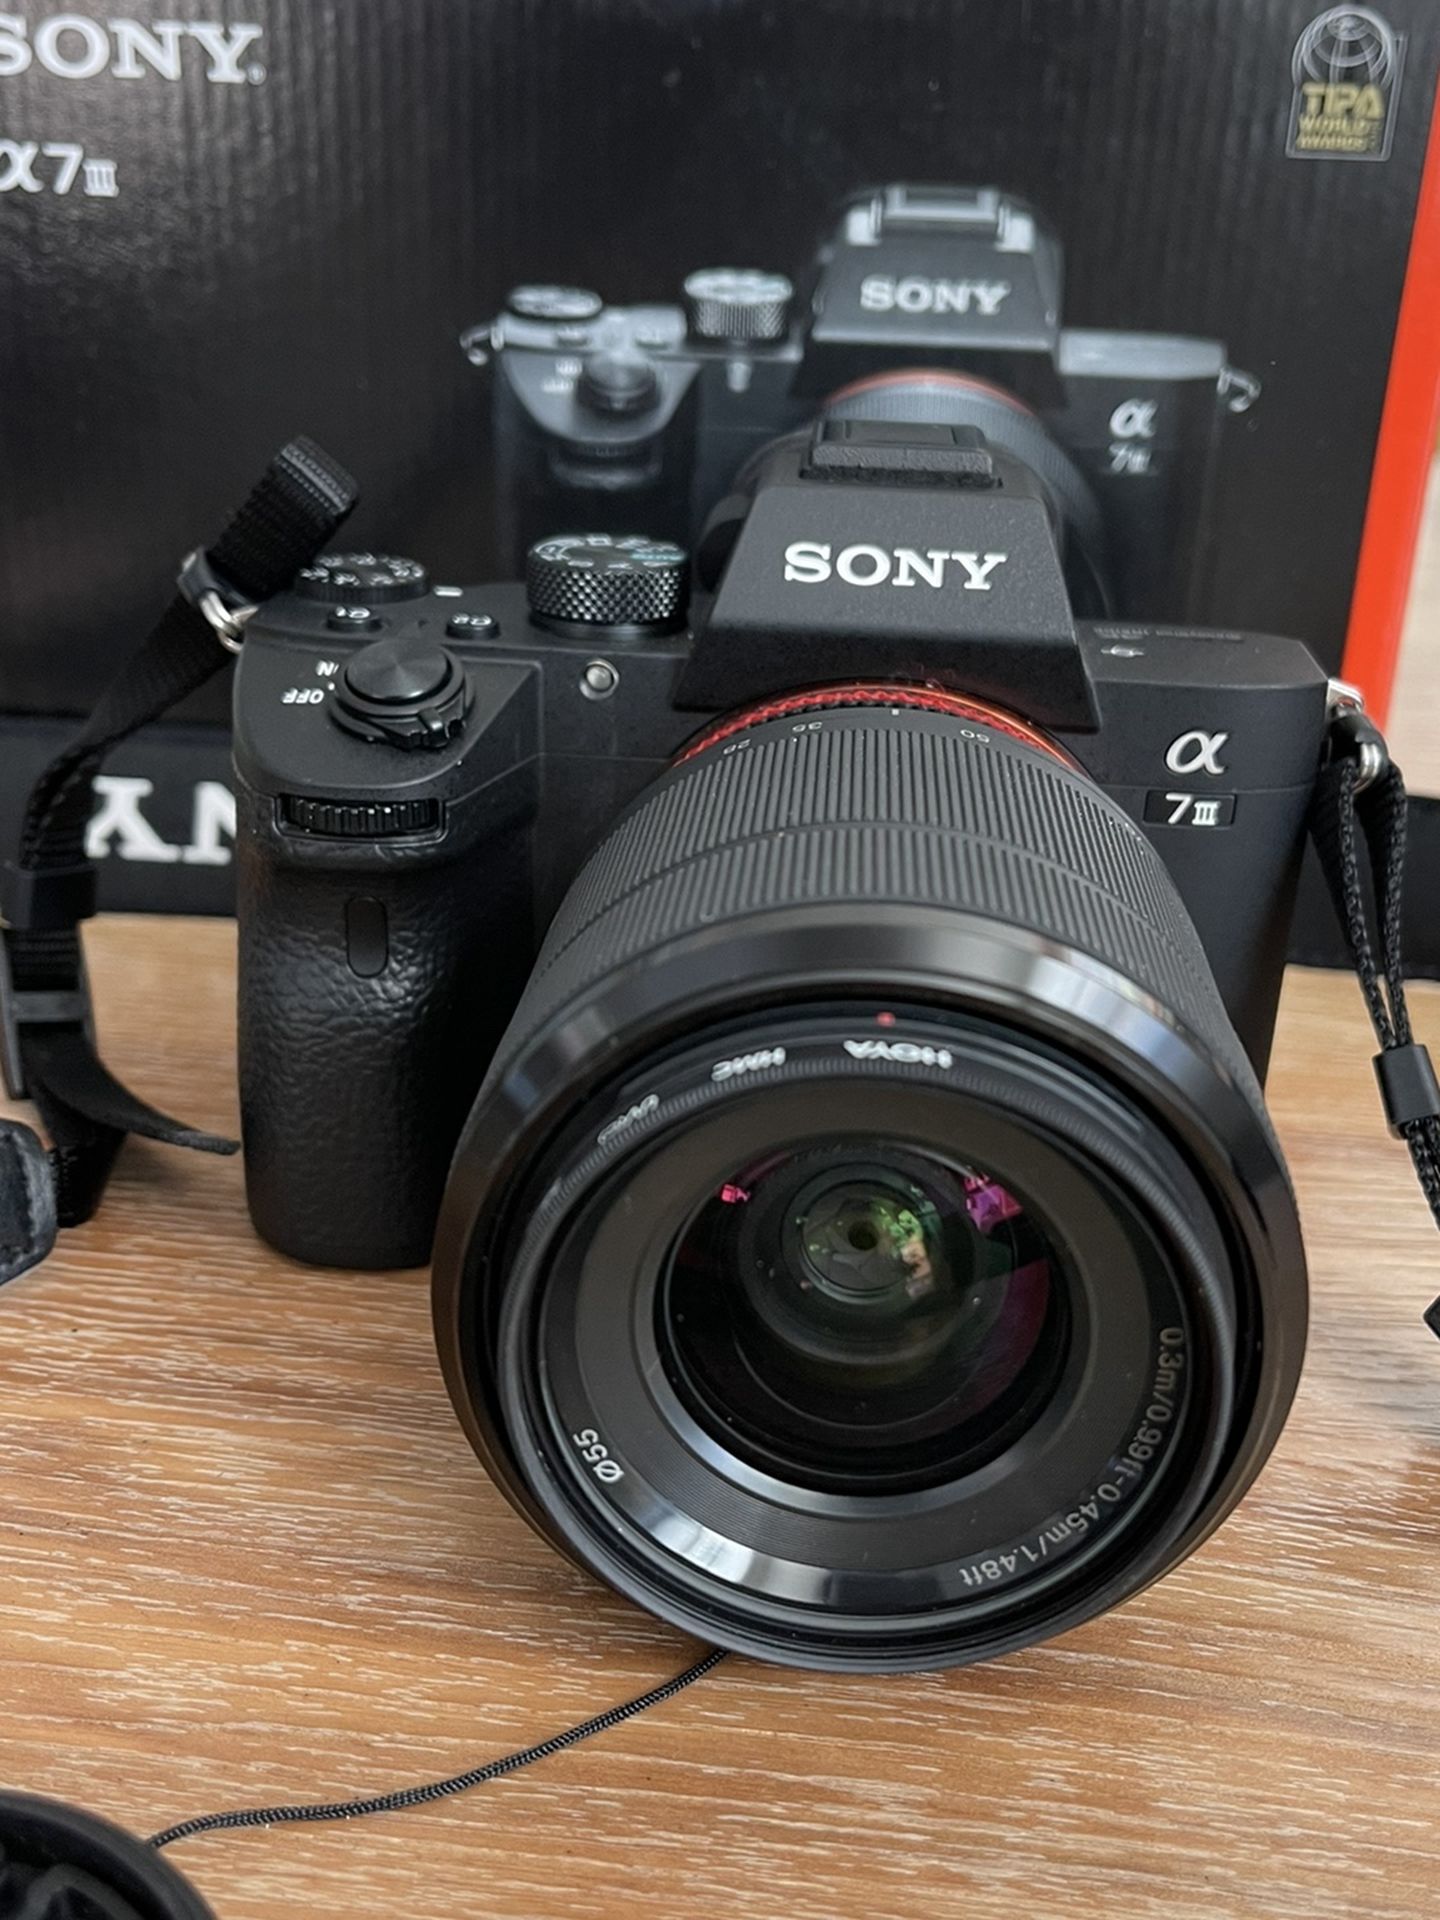 Sony full frame mirrorless camera A7iii (A7m3) + FE28-70mm F3.6-5.6 OSS Lens included.